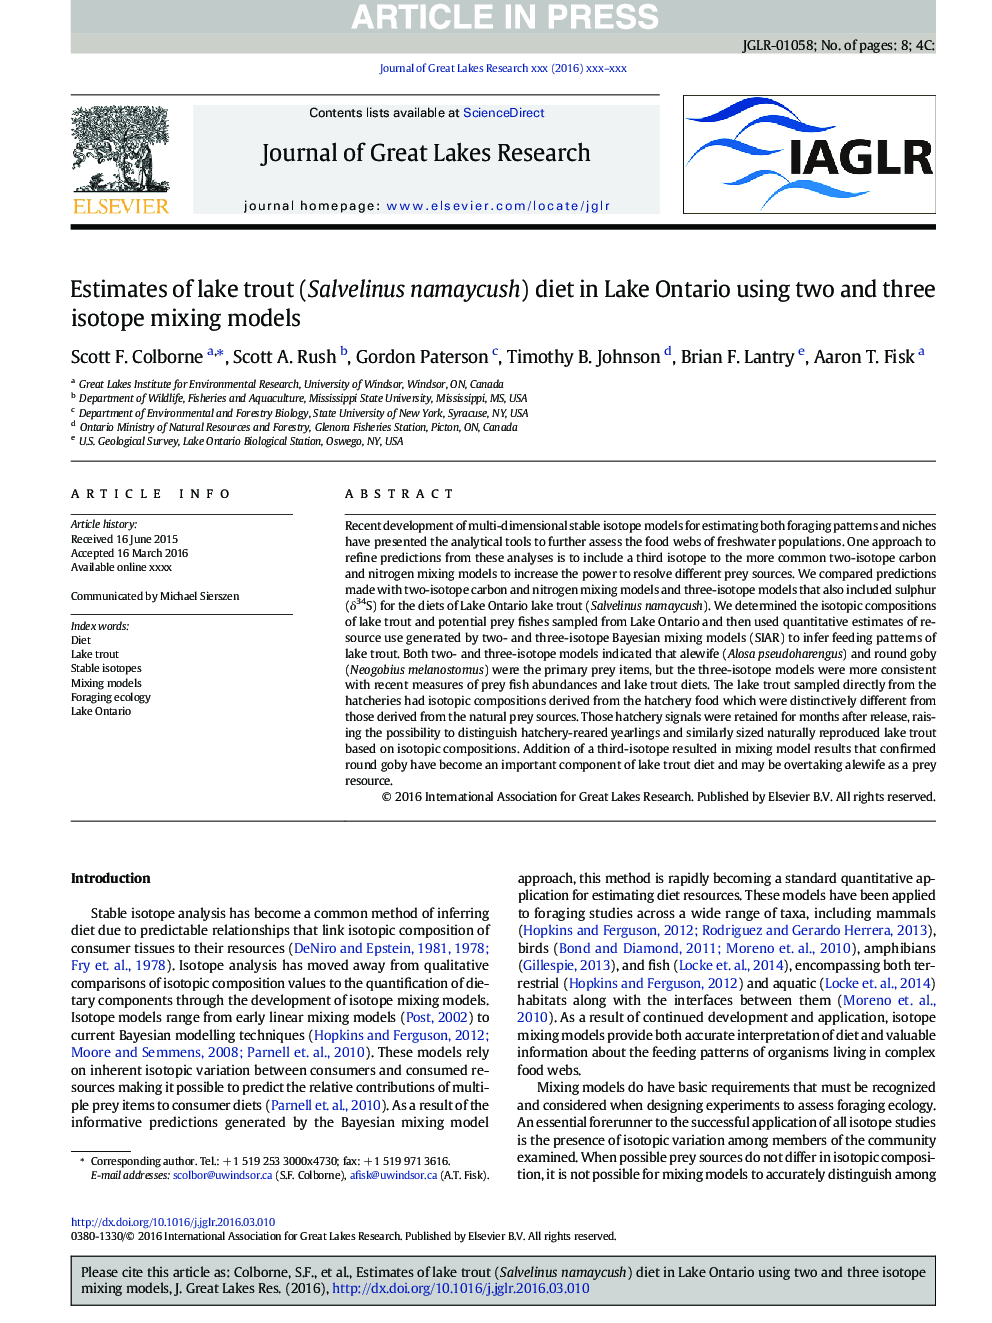 Estimates of lake trout (Salvelinus namaycush) diet in Lake Ontario using two and three isotope mixing models